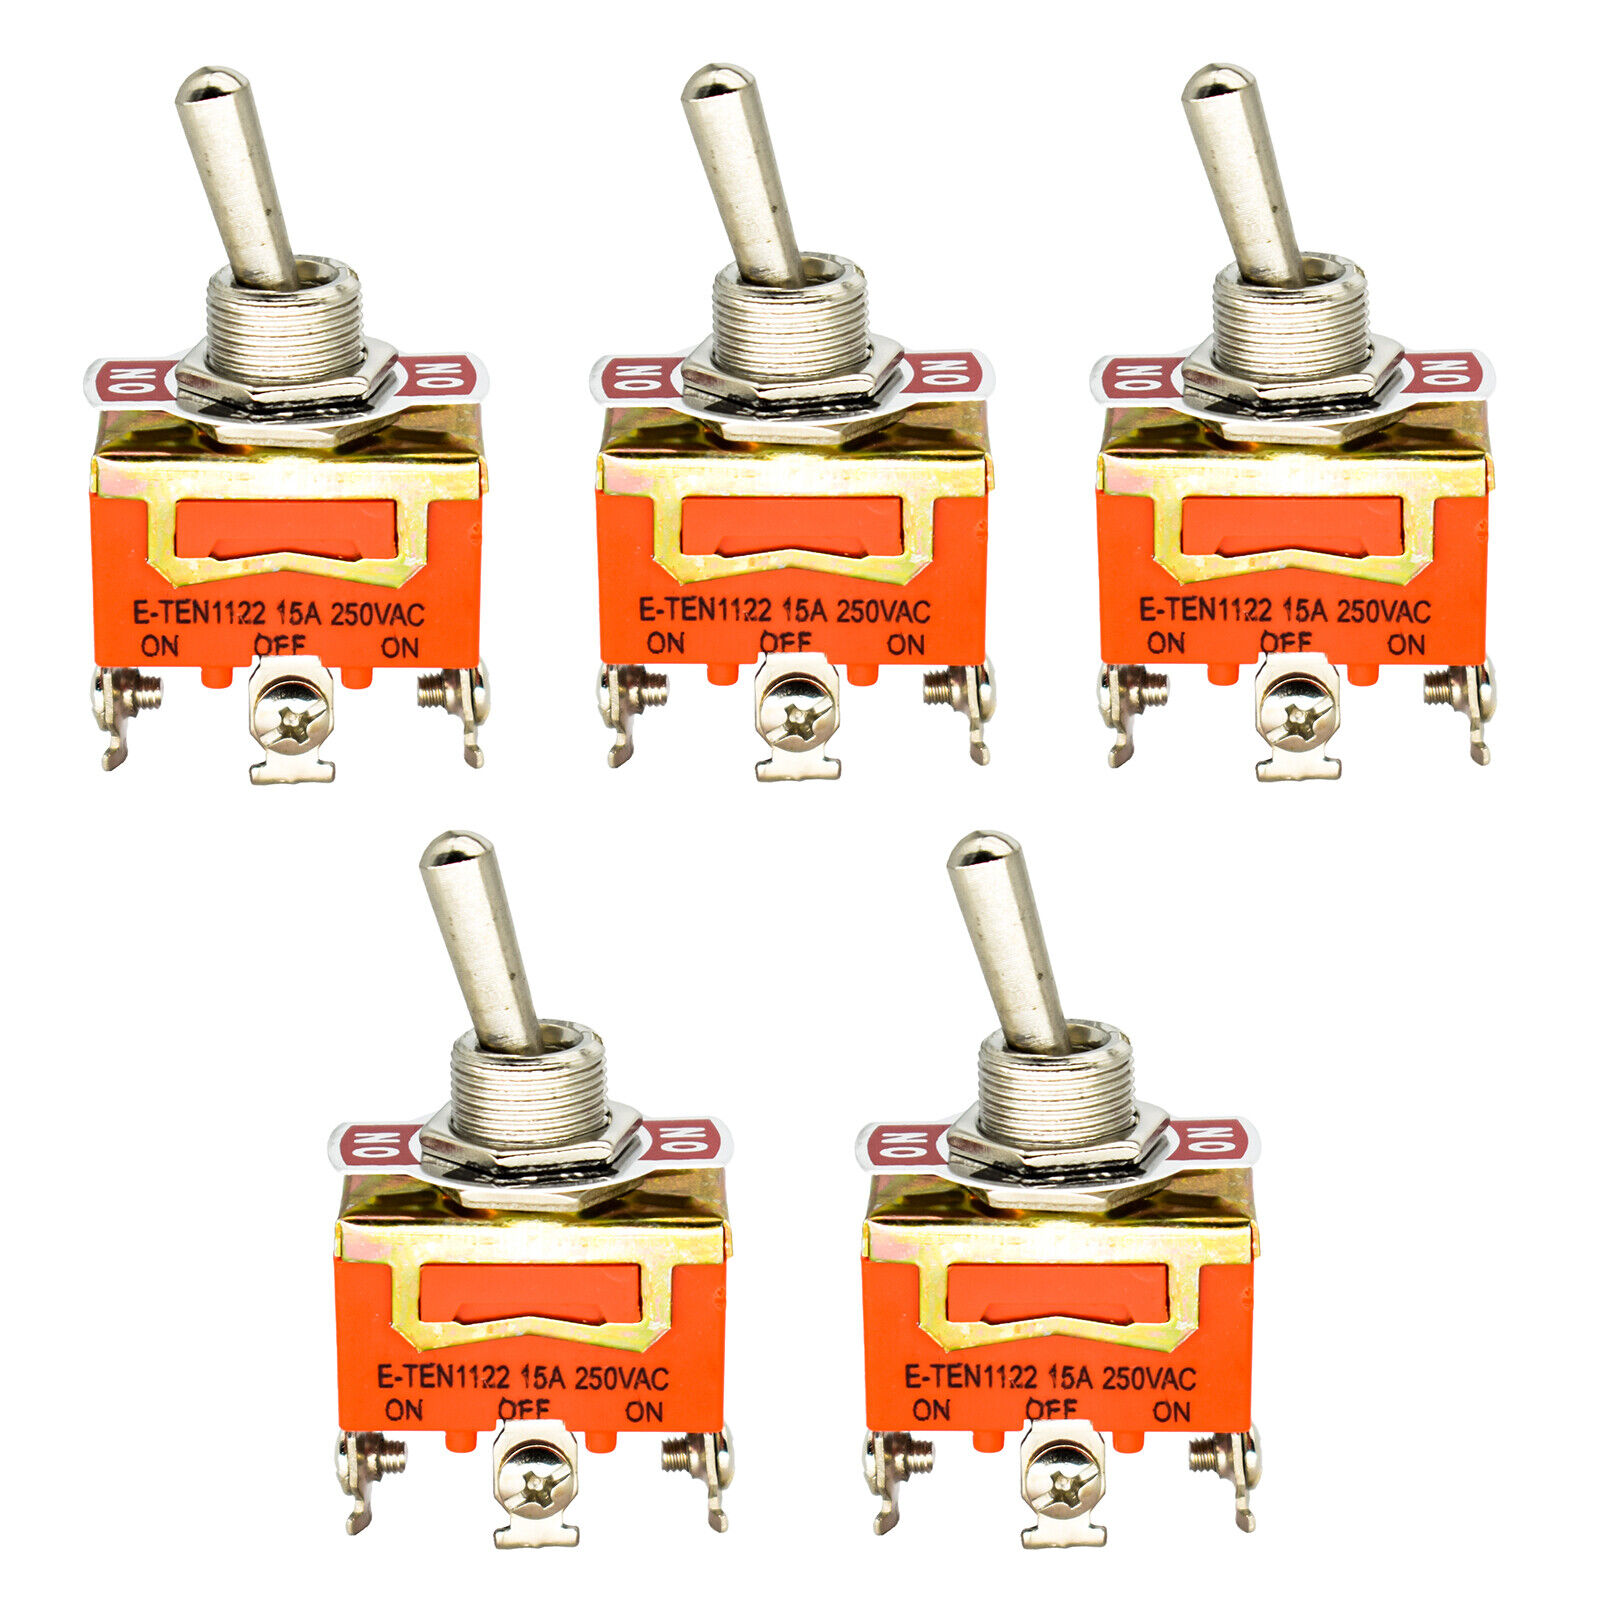 5X Toggle SWITCH ON/OFF Heavy Duty 30A 125V SPDT 2 Terminal Car Boat Waterproof